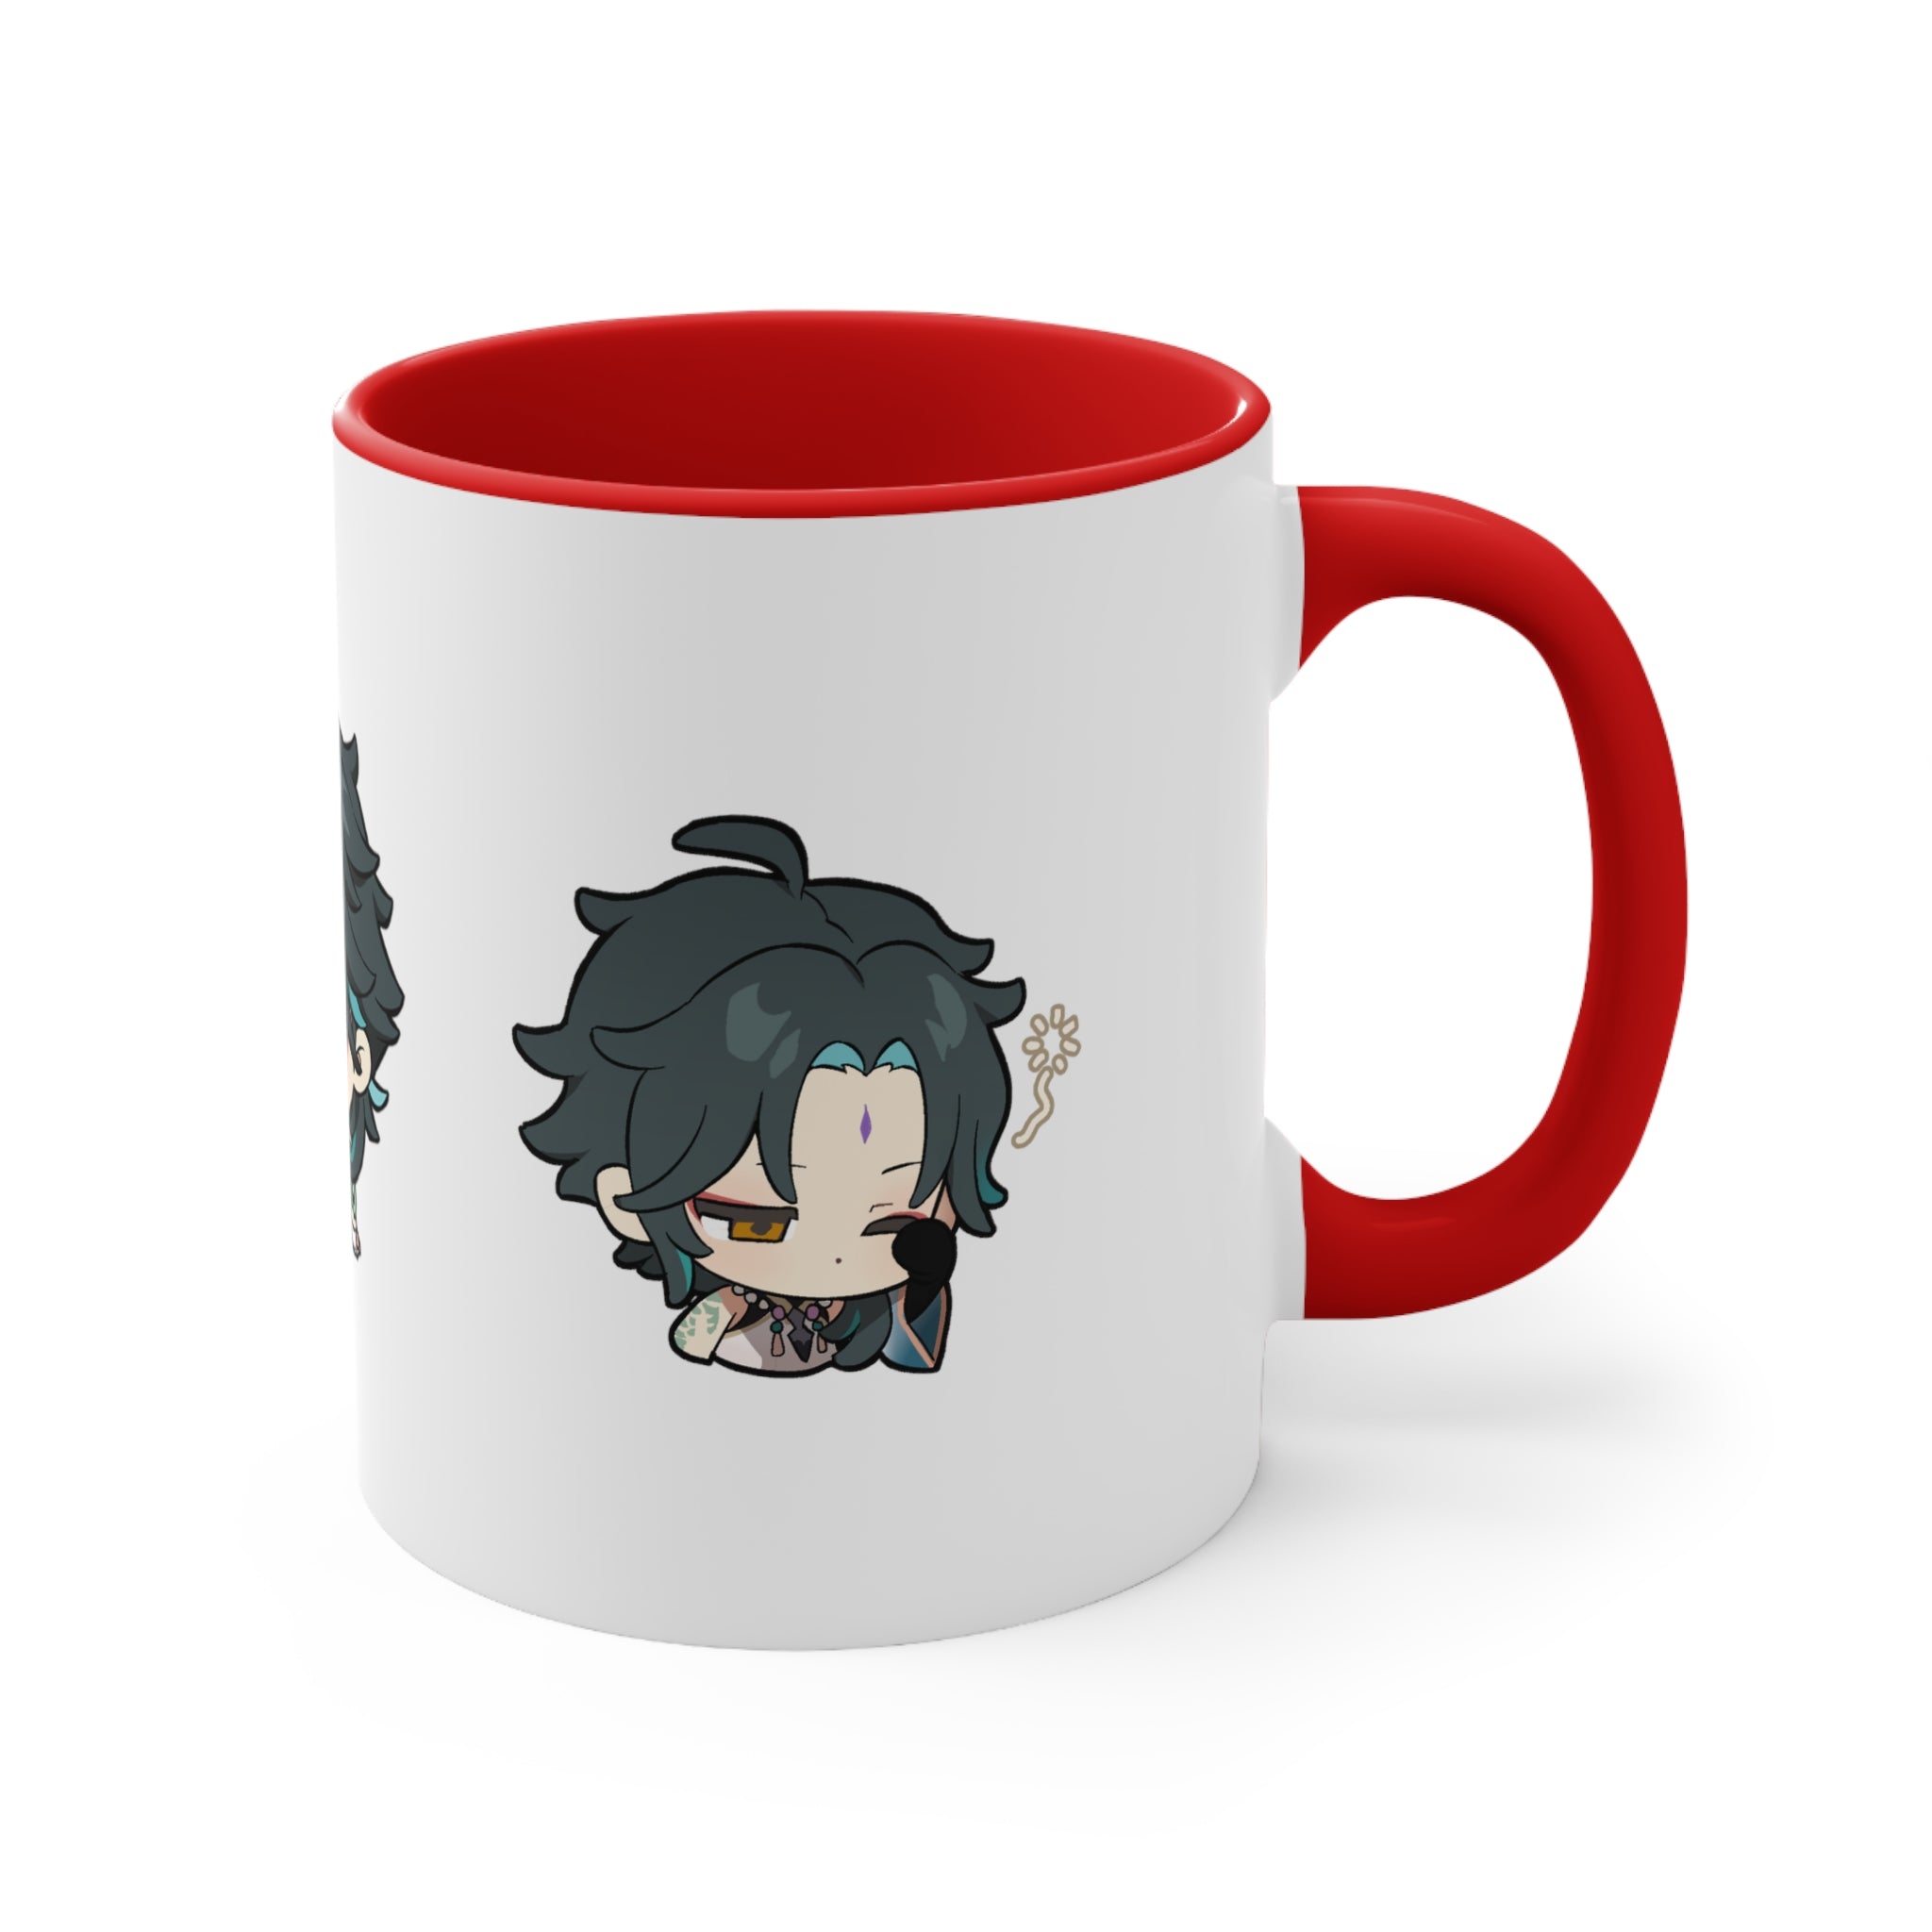 Xiao Genshin Impact Accent Coffee Mug, 11oz Cups Mugs Cup Gift For Gamer Gifts Game Anime Fanart Fan Birthday Valentine's Christmas